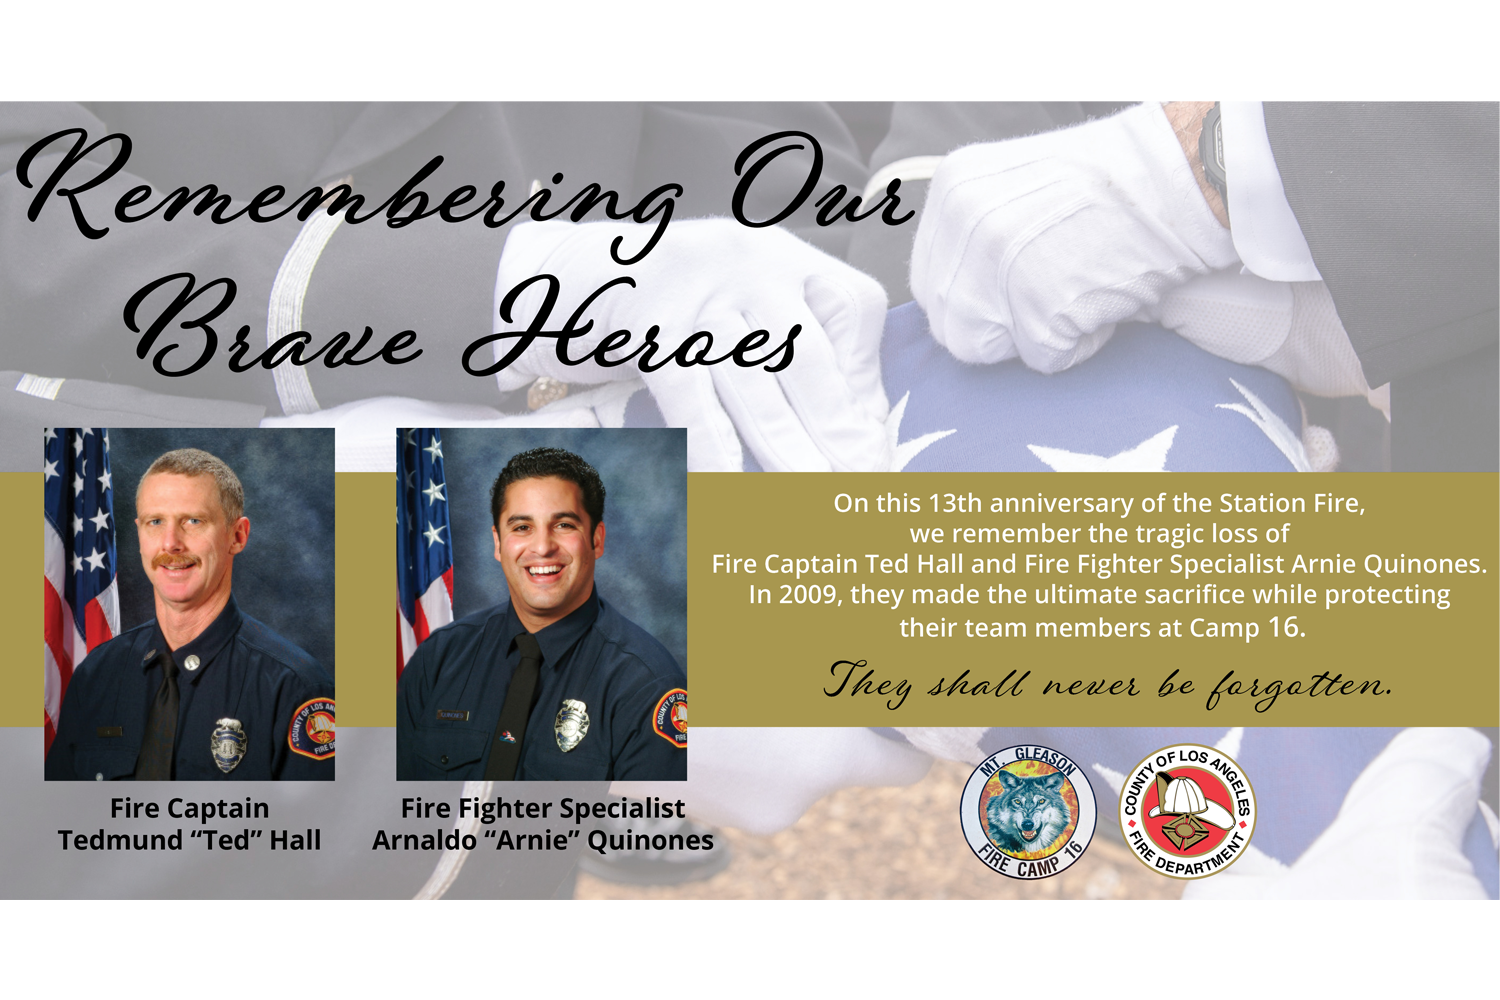 Tuesday, August 30, 2022, marked the 13-year anniversary of the line-of-duty deaths of Los Angeles County Fire Department Fire Captain Tedmund “Ted” Hall and Fire Fighter Specialist (FFS) Arnaldo “Arnie” Quinones.